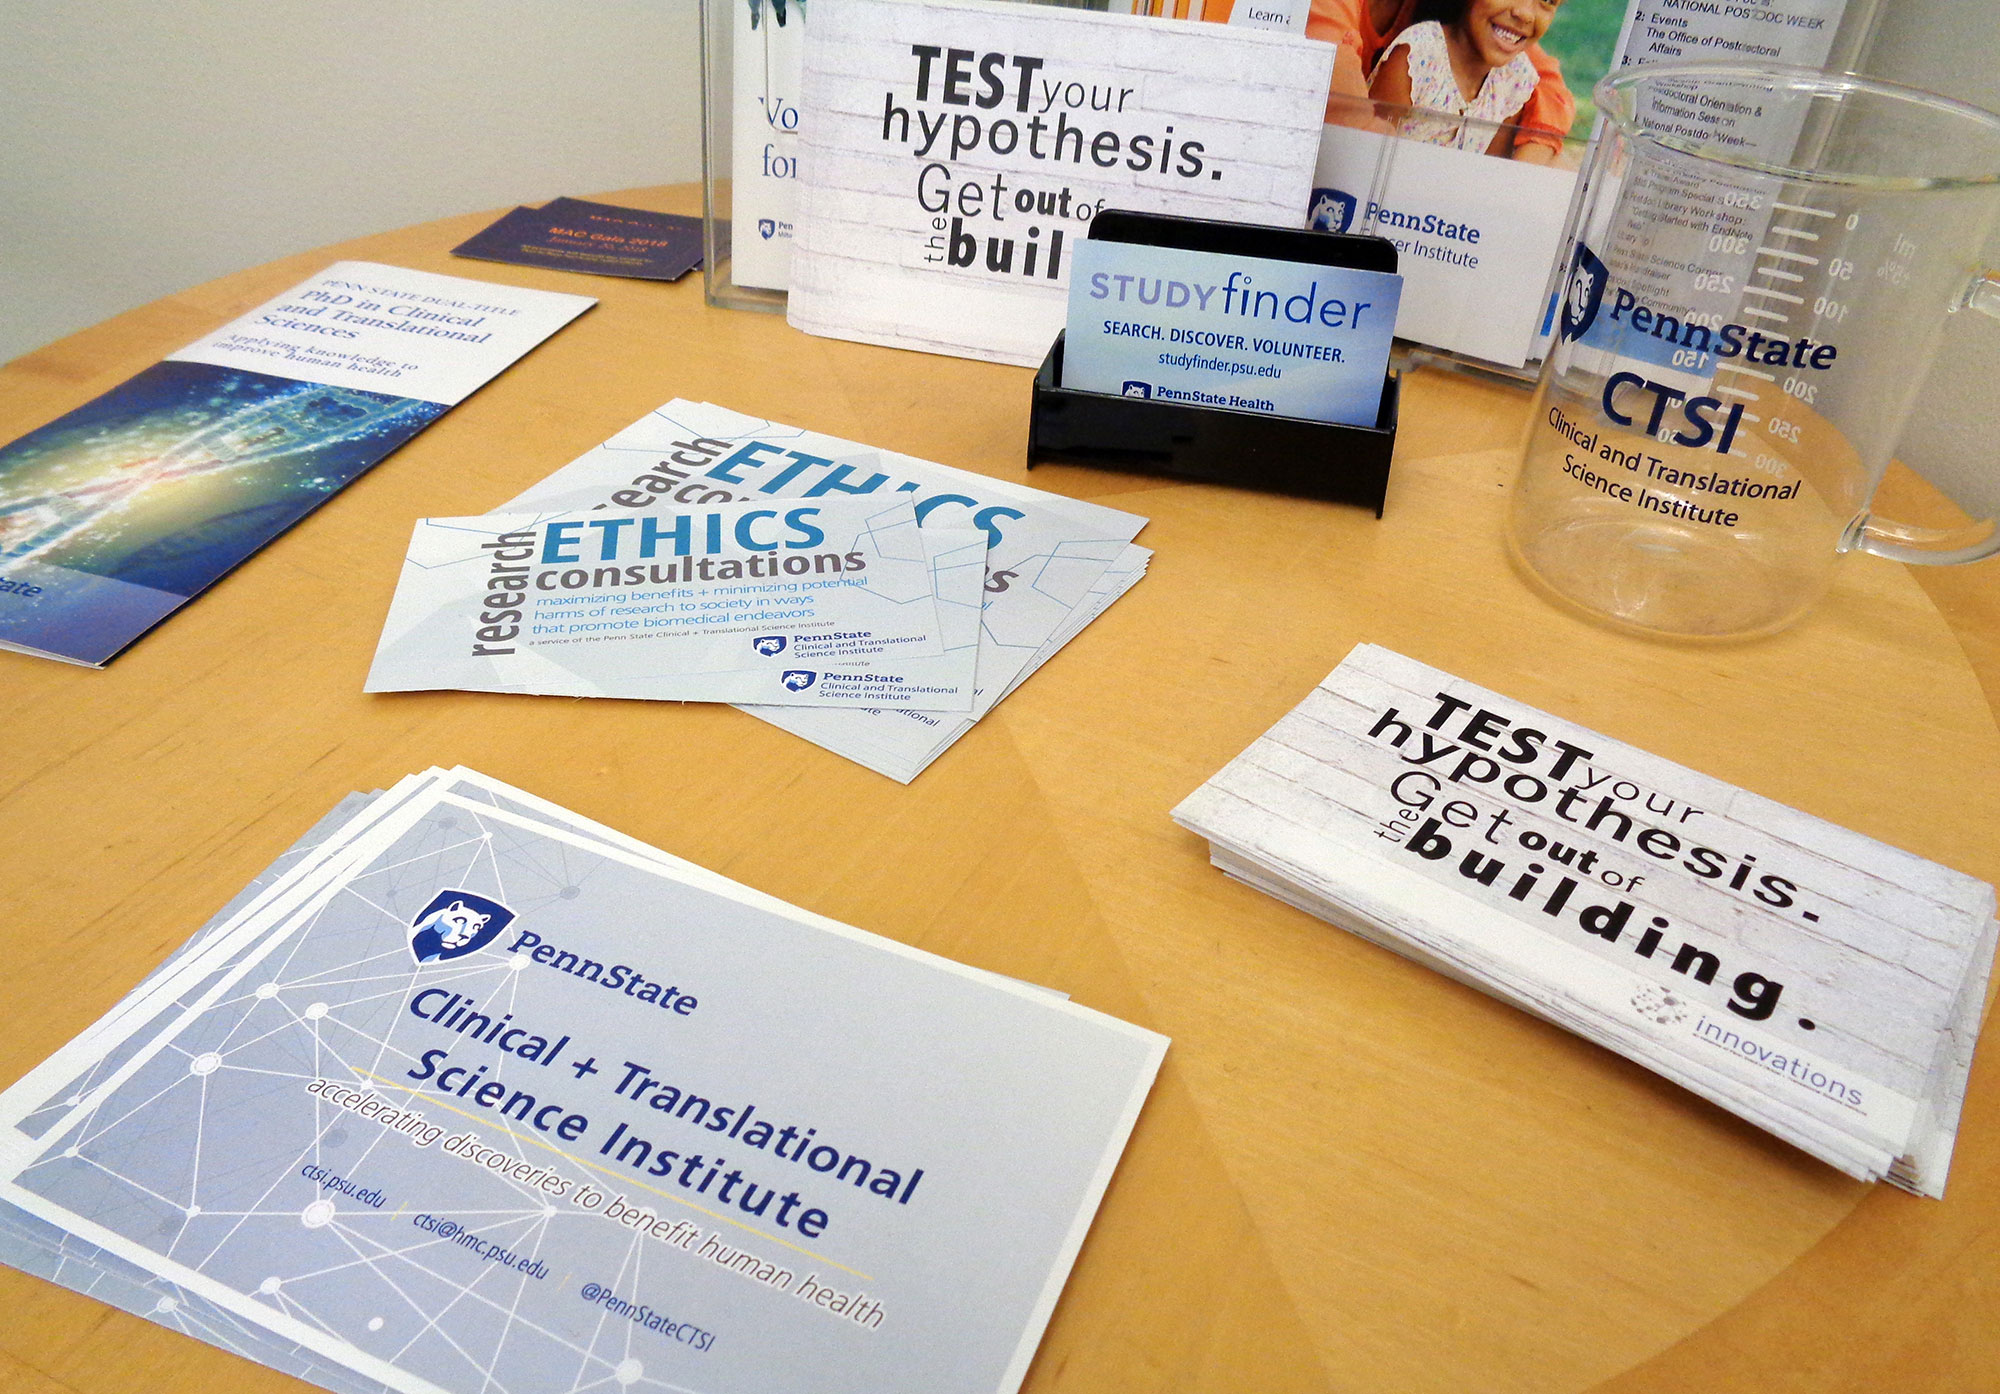 A promotional image for Penn State Clinical and Translational Science Institute shows a number of pamplets, cards and other items advertising CTSI services spread out on a table.